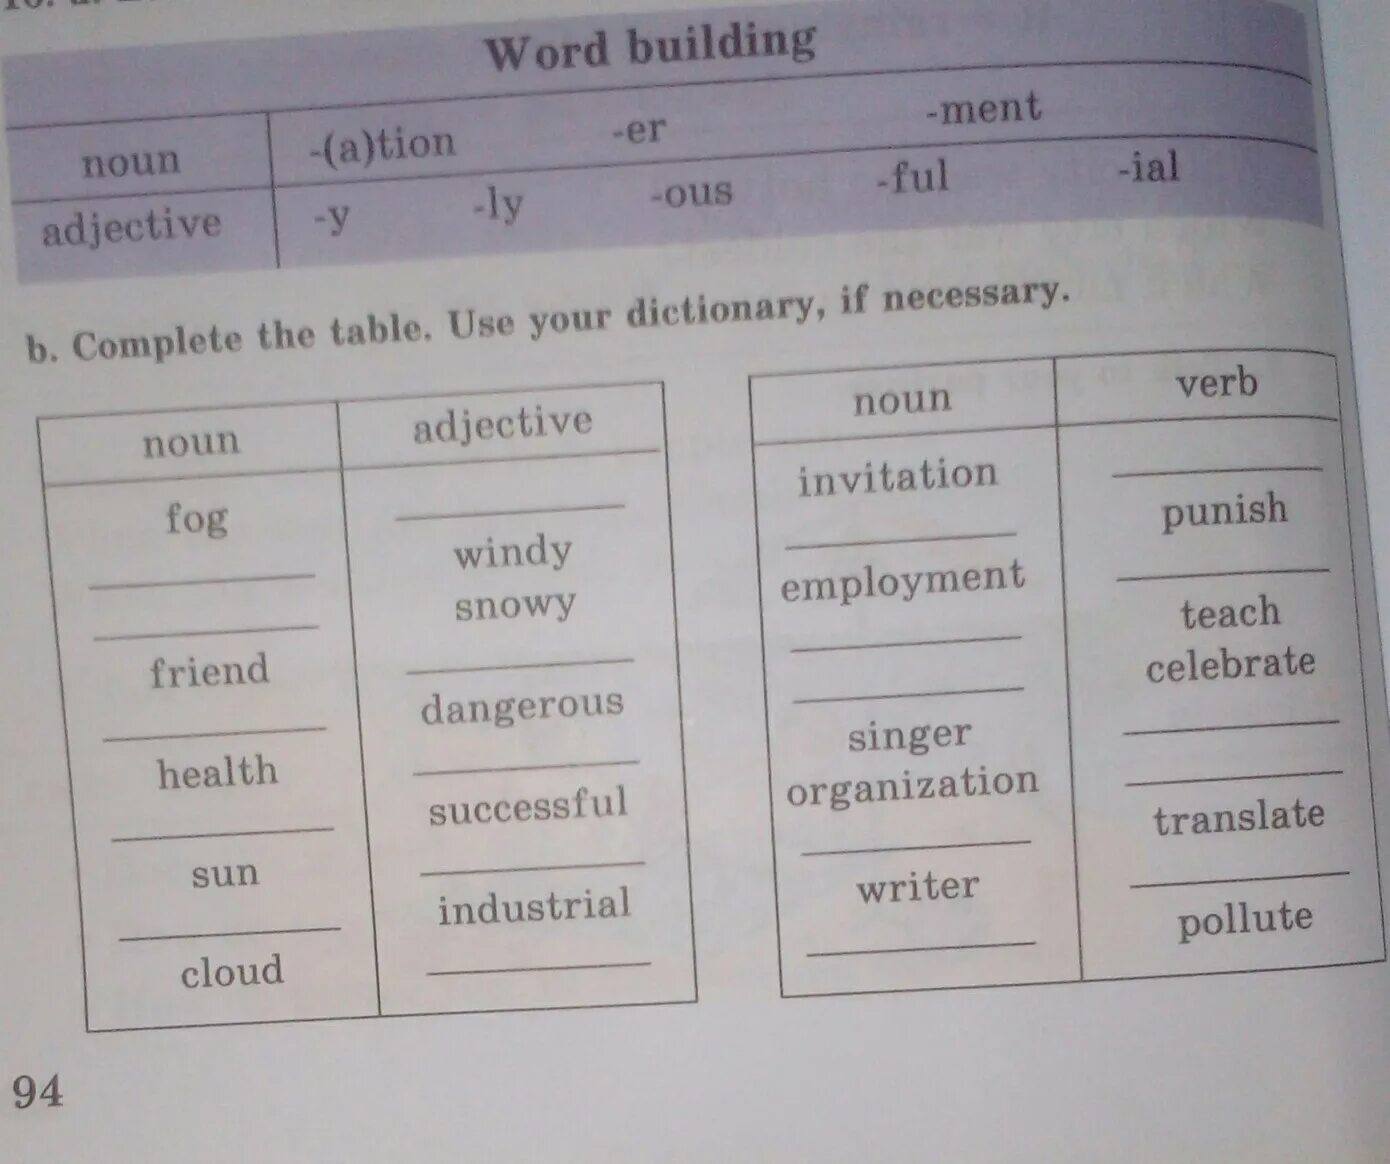 Complete the Table таблица. Word building таблица. Word building правила. Word building in English таблица. Use a dictionary if necessary